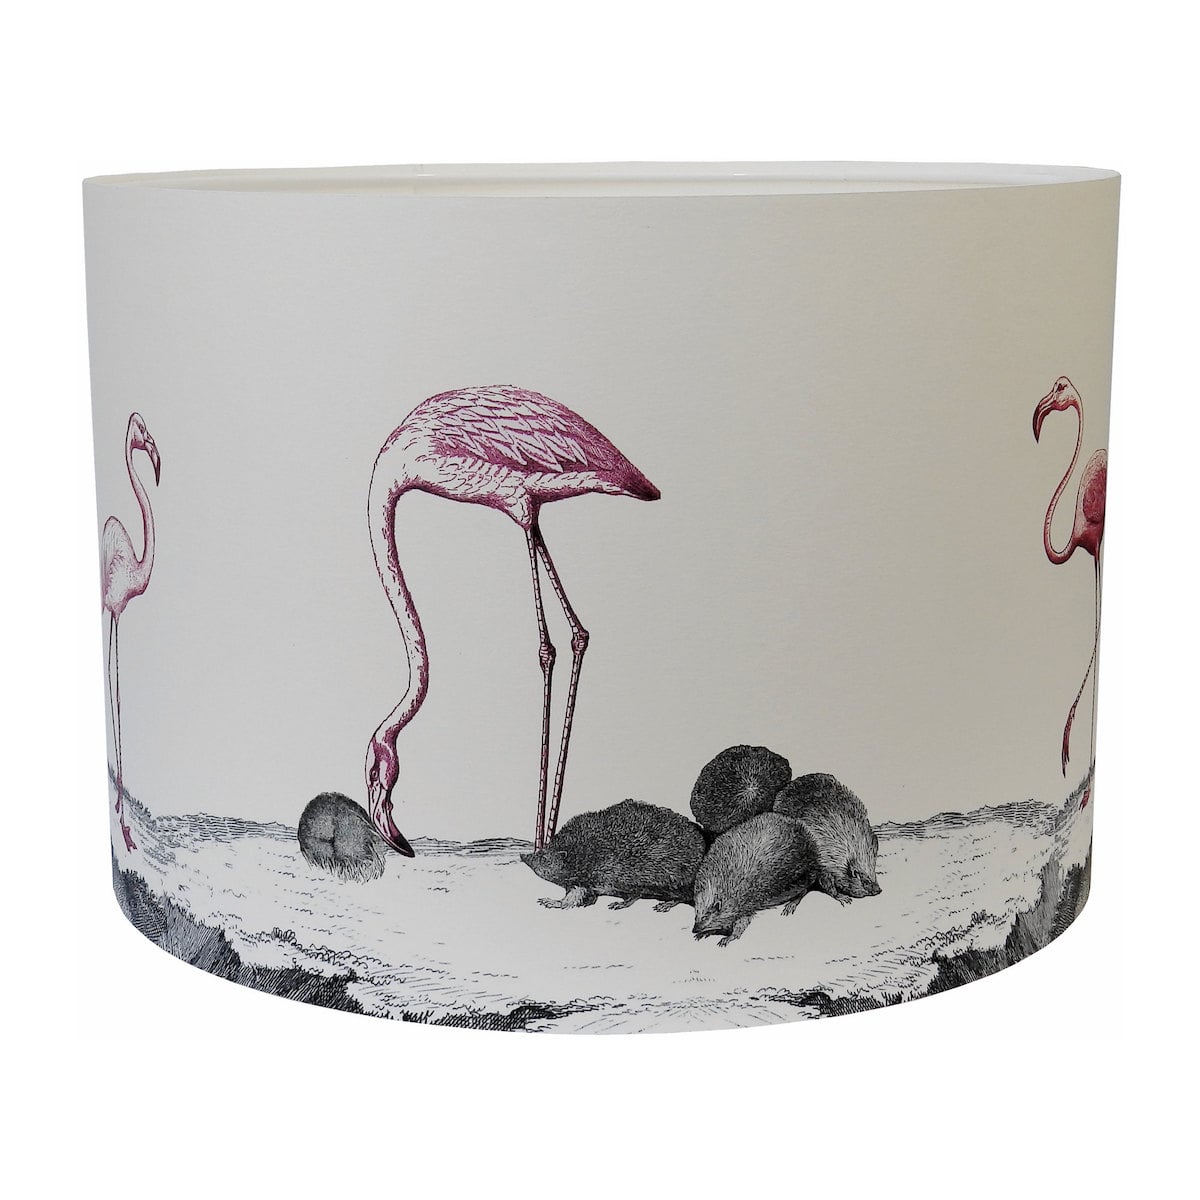 Curious Croquet Lampshade by Mountain & Molehill for AUTHOR's luxury and unique collections of British-made home accessories